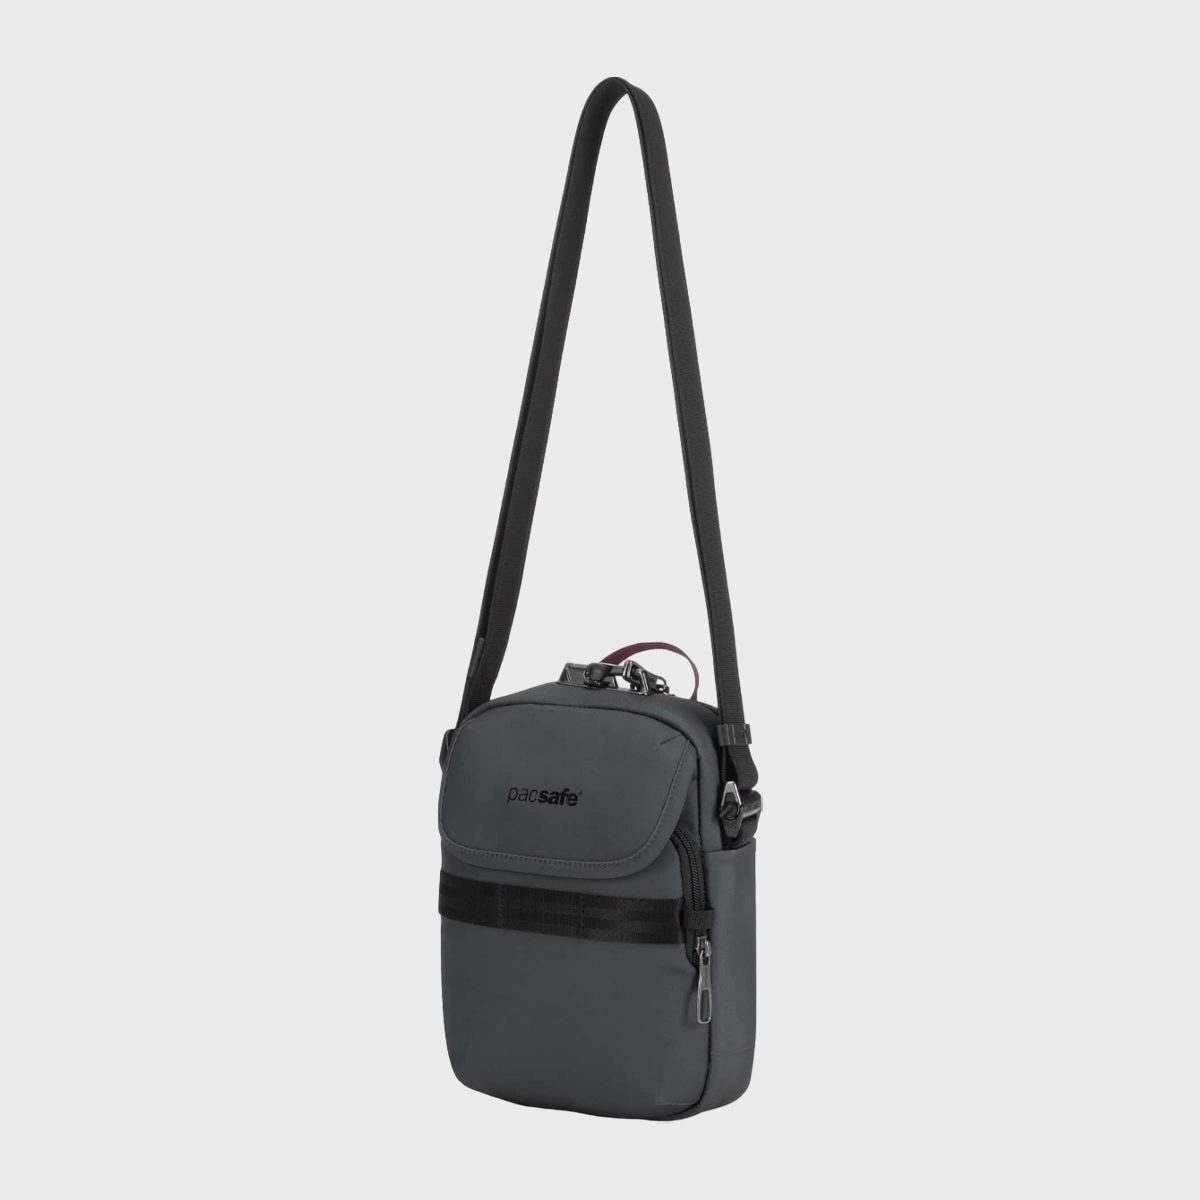 From abroad to your local grocery store, the Crossbody Sling Bag